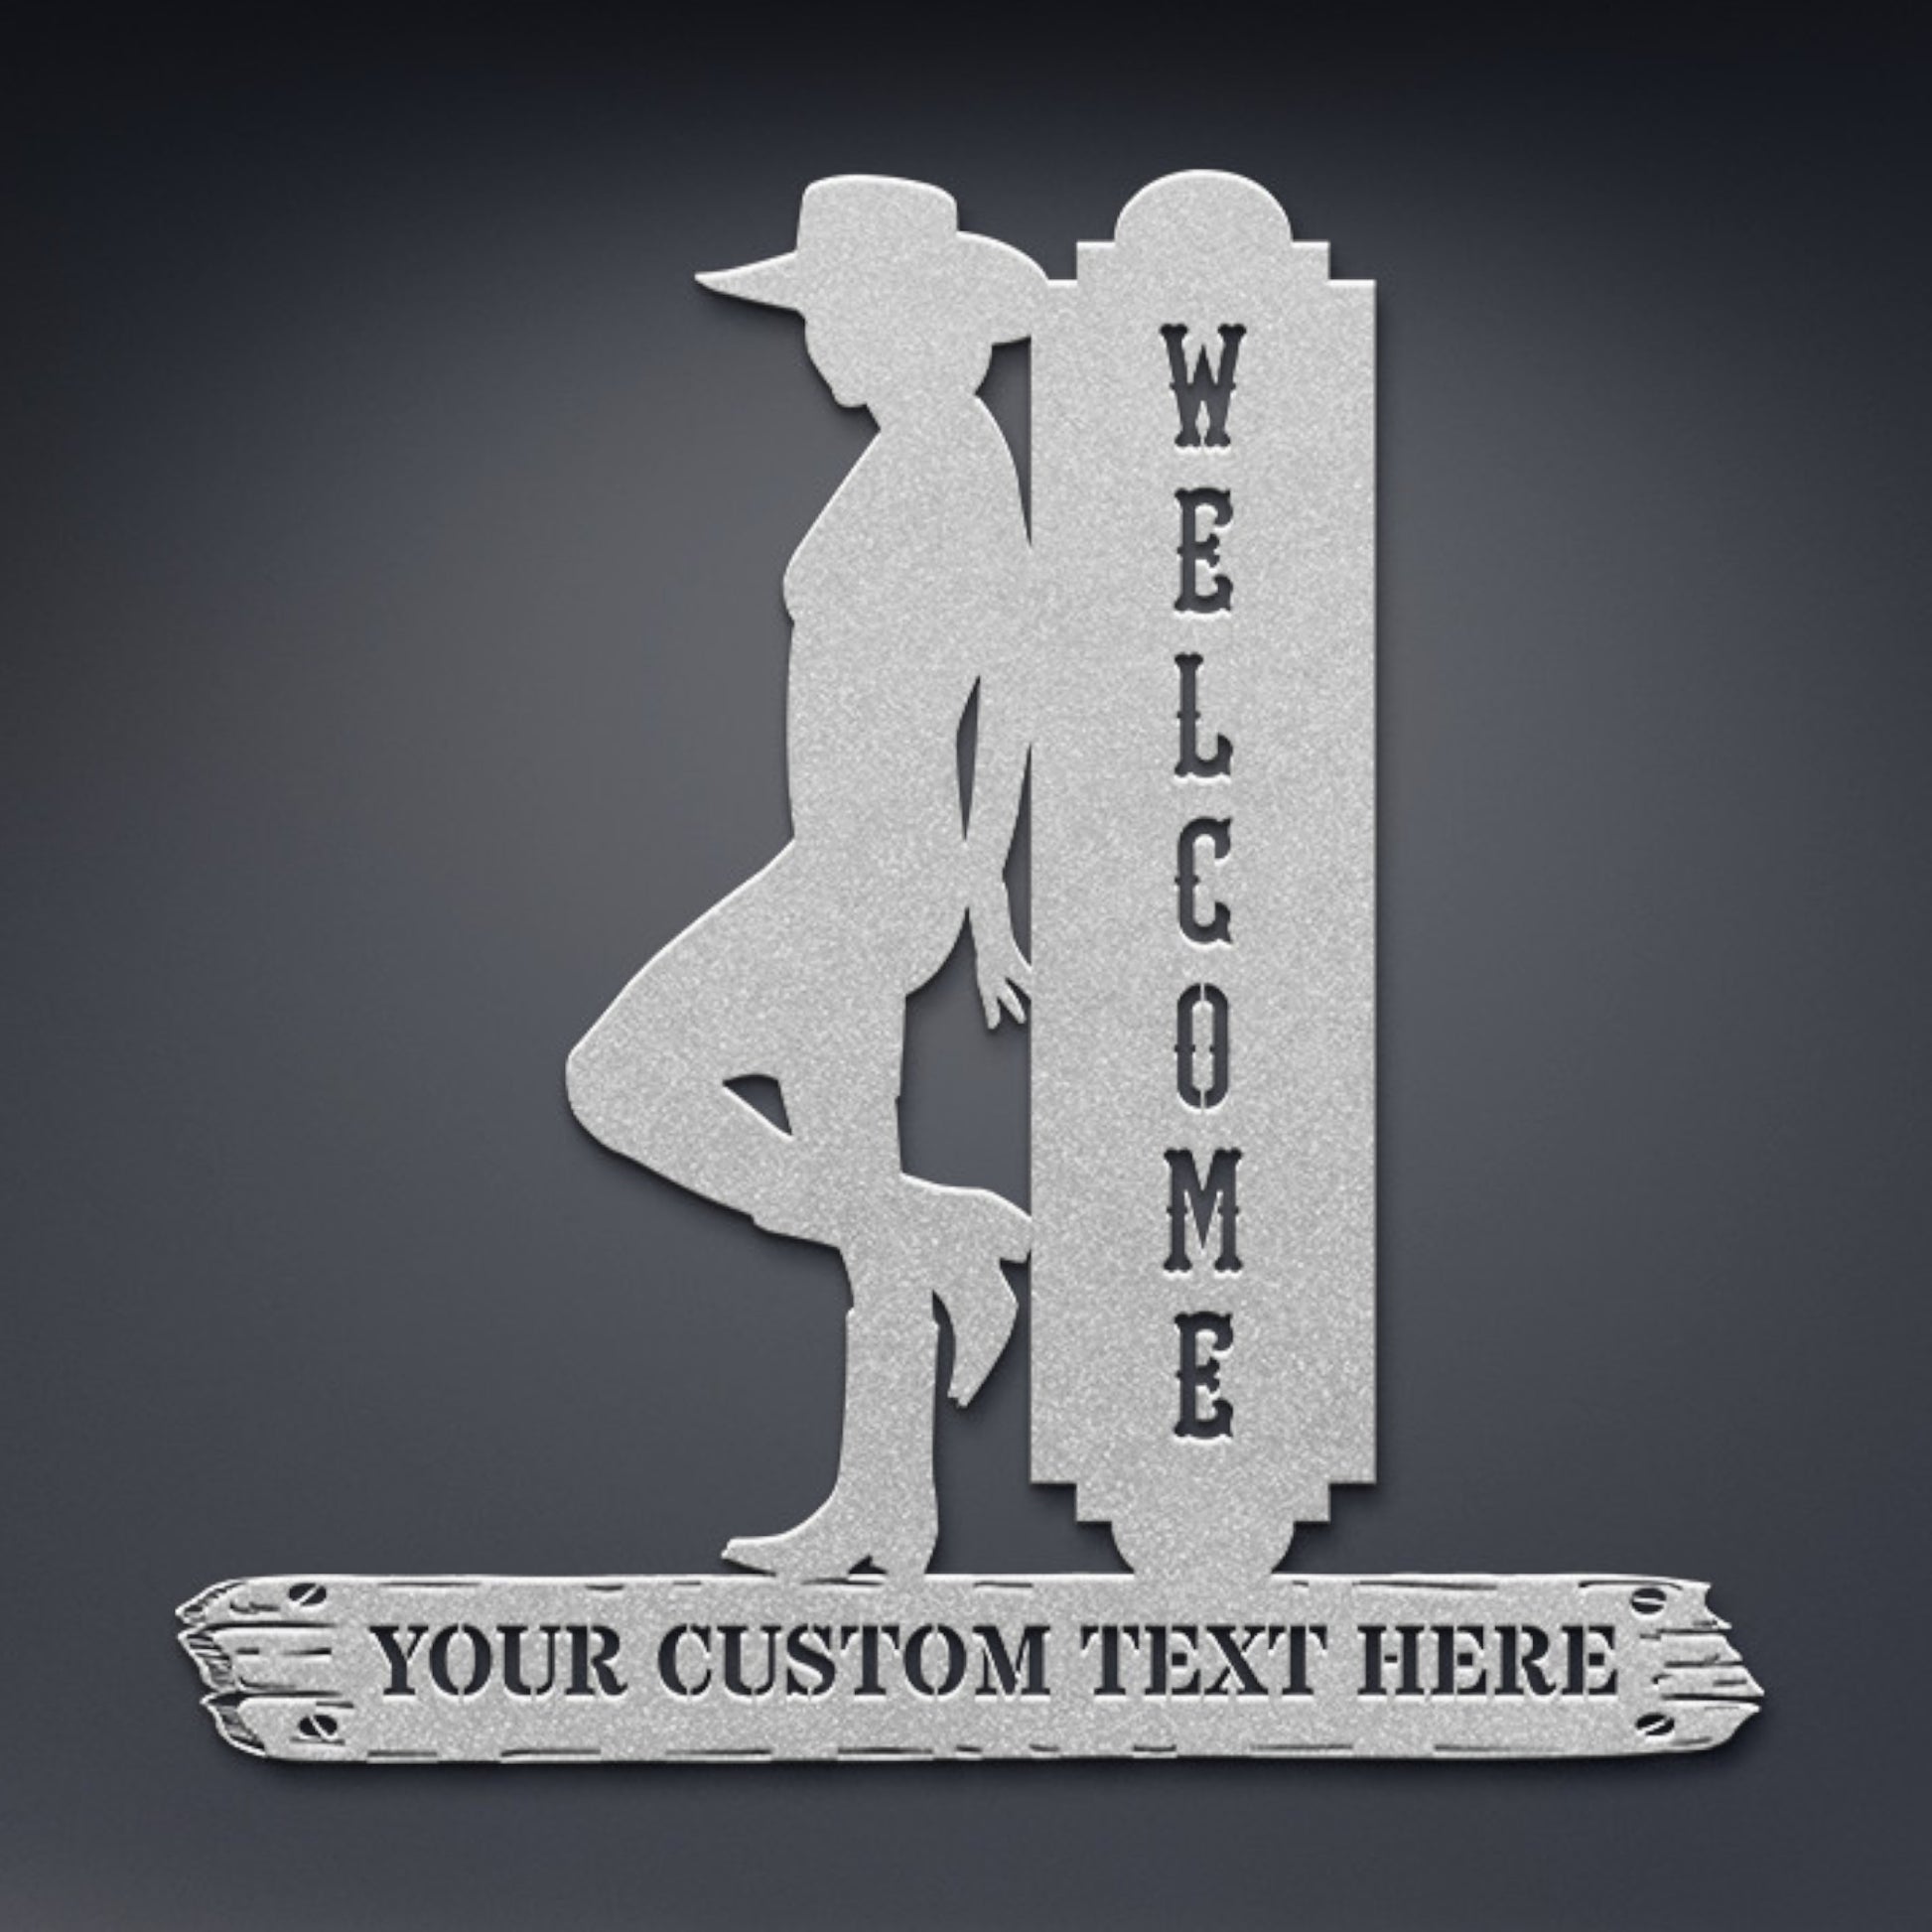 Personalized Home Address Sign Gift. Customizable Cowgirl Metal Sign. Western Wall Decor. Welcome Door Hanging Name Sign. Housewarming Gift